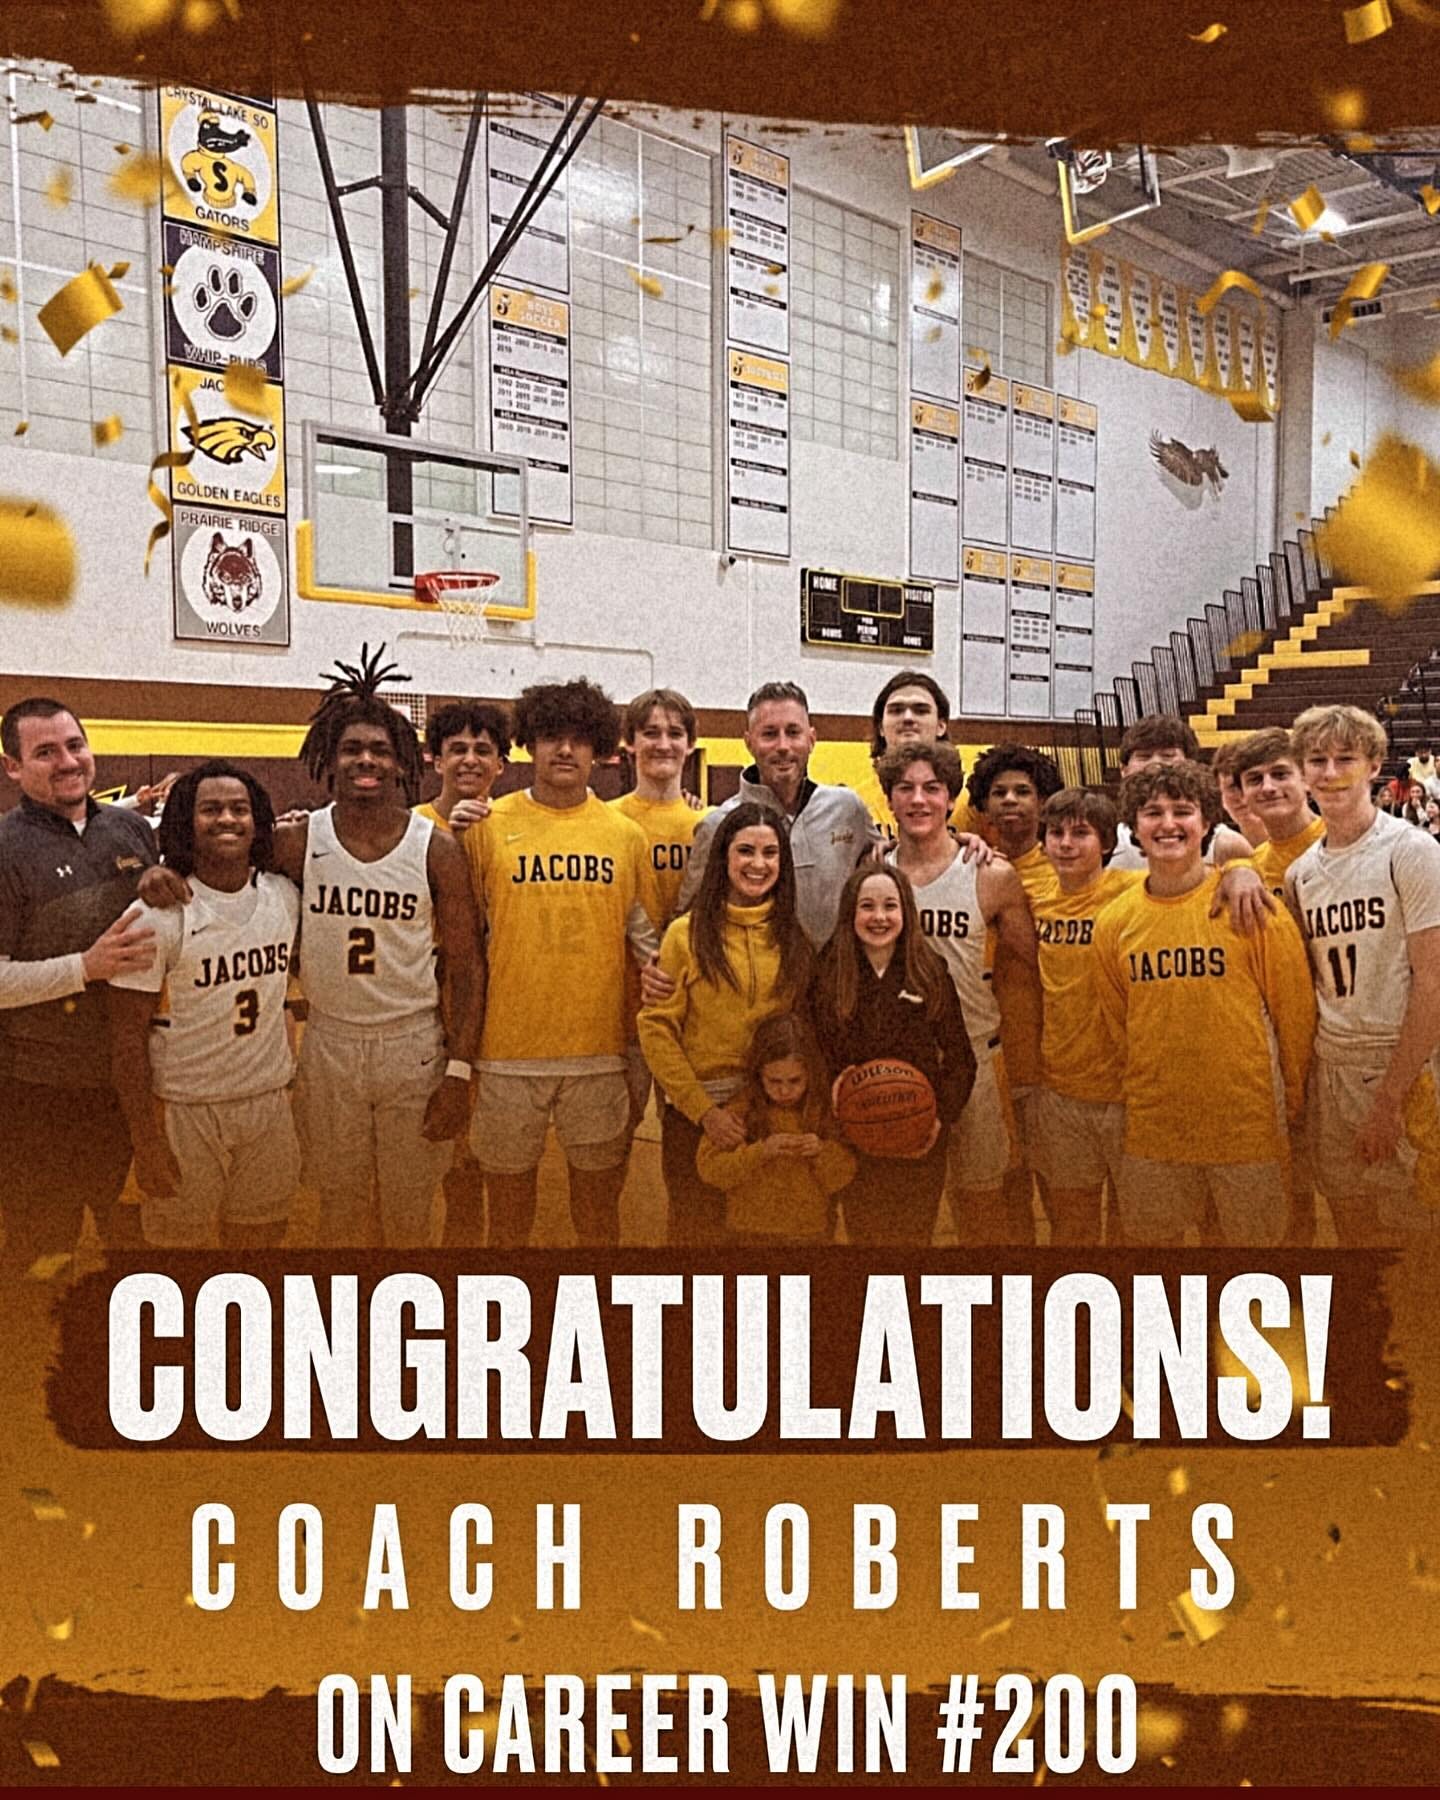 May be an image of 5 people, people playing basketball and text that says '$ GATORS GOLDEN EAGLES PRAIRIE RIOGE WOLVES ES JACOBS JACOBS JACOBS 2 REDE JACOBS JACOBS CONGRATULATIONS! COACH ROBERTS ON CAREER WIN #200'